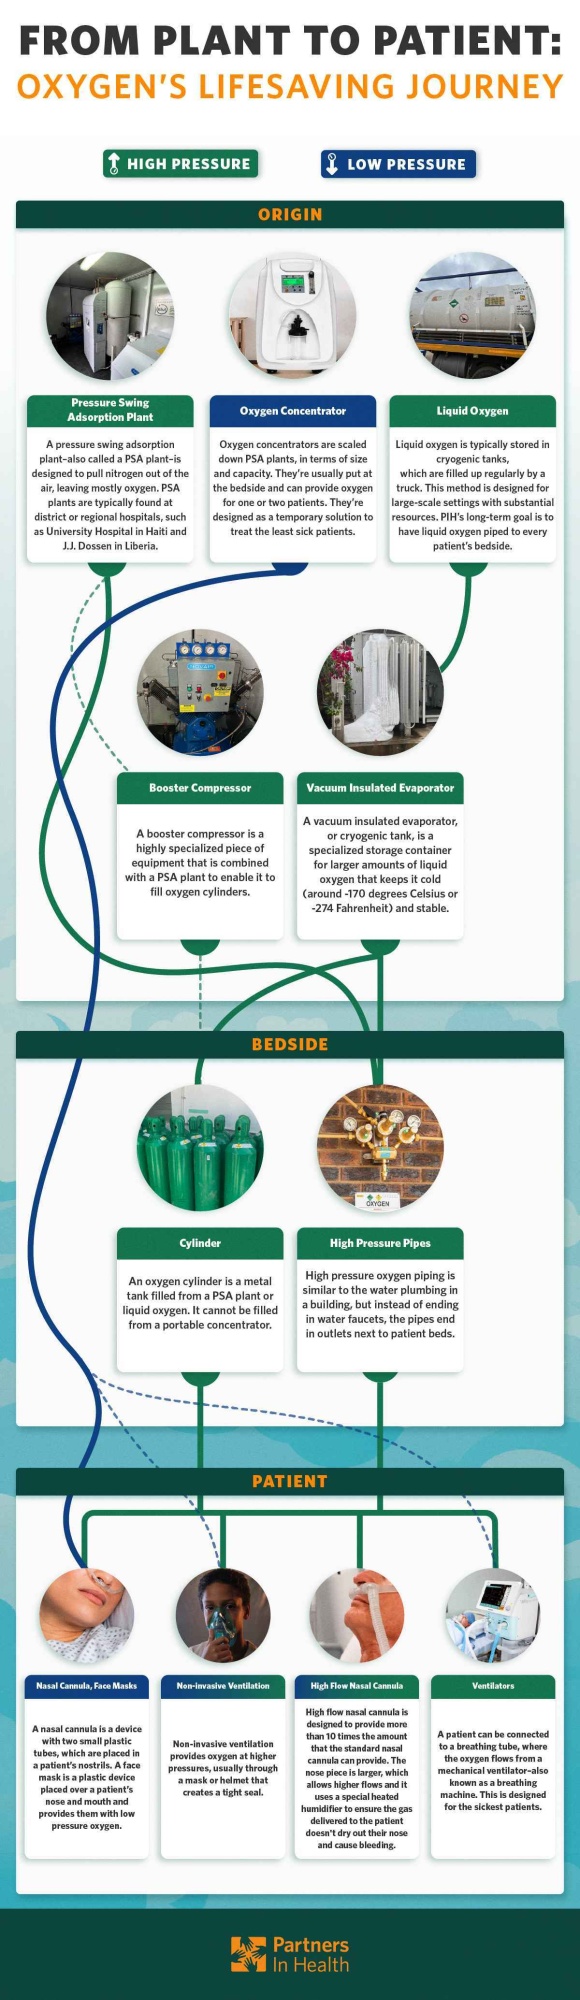 infographic tracing oxygen's journey from plant to patient